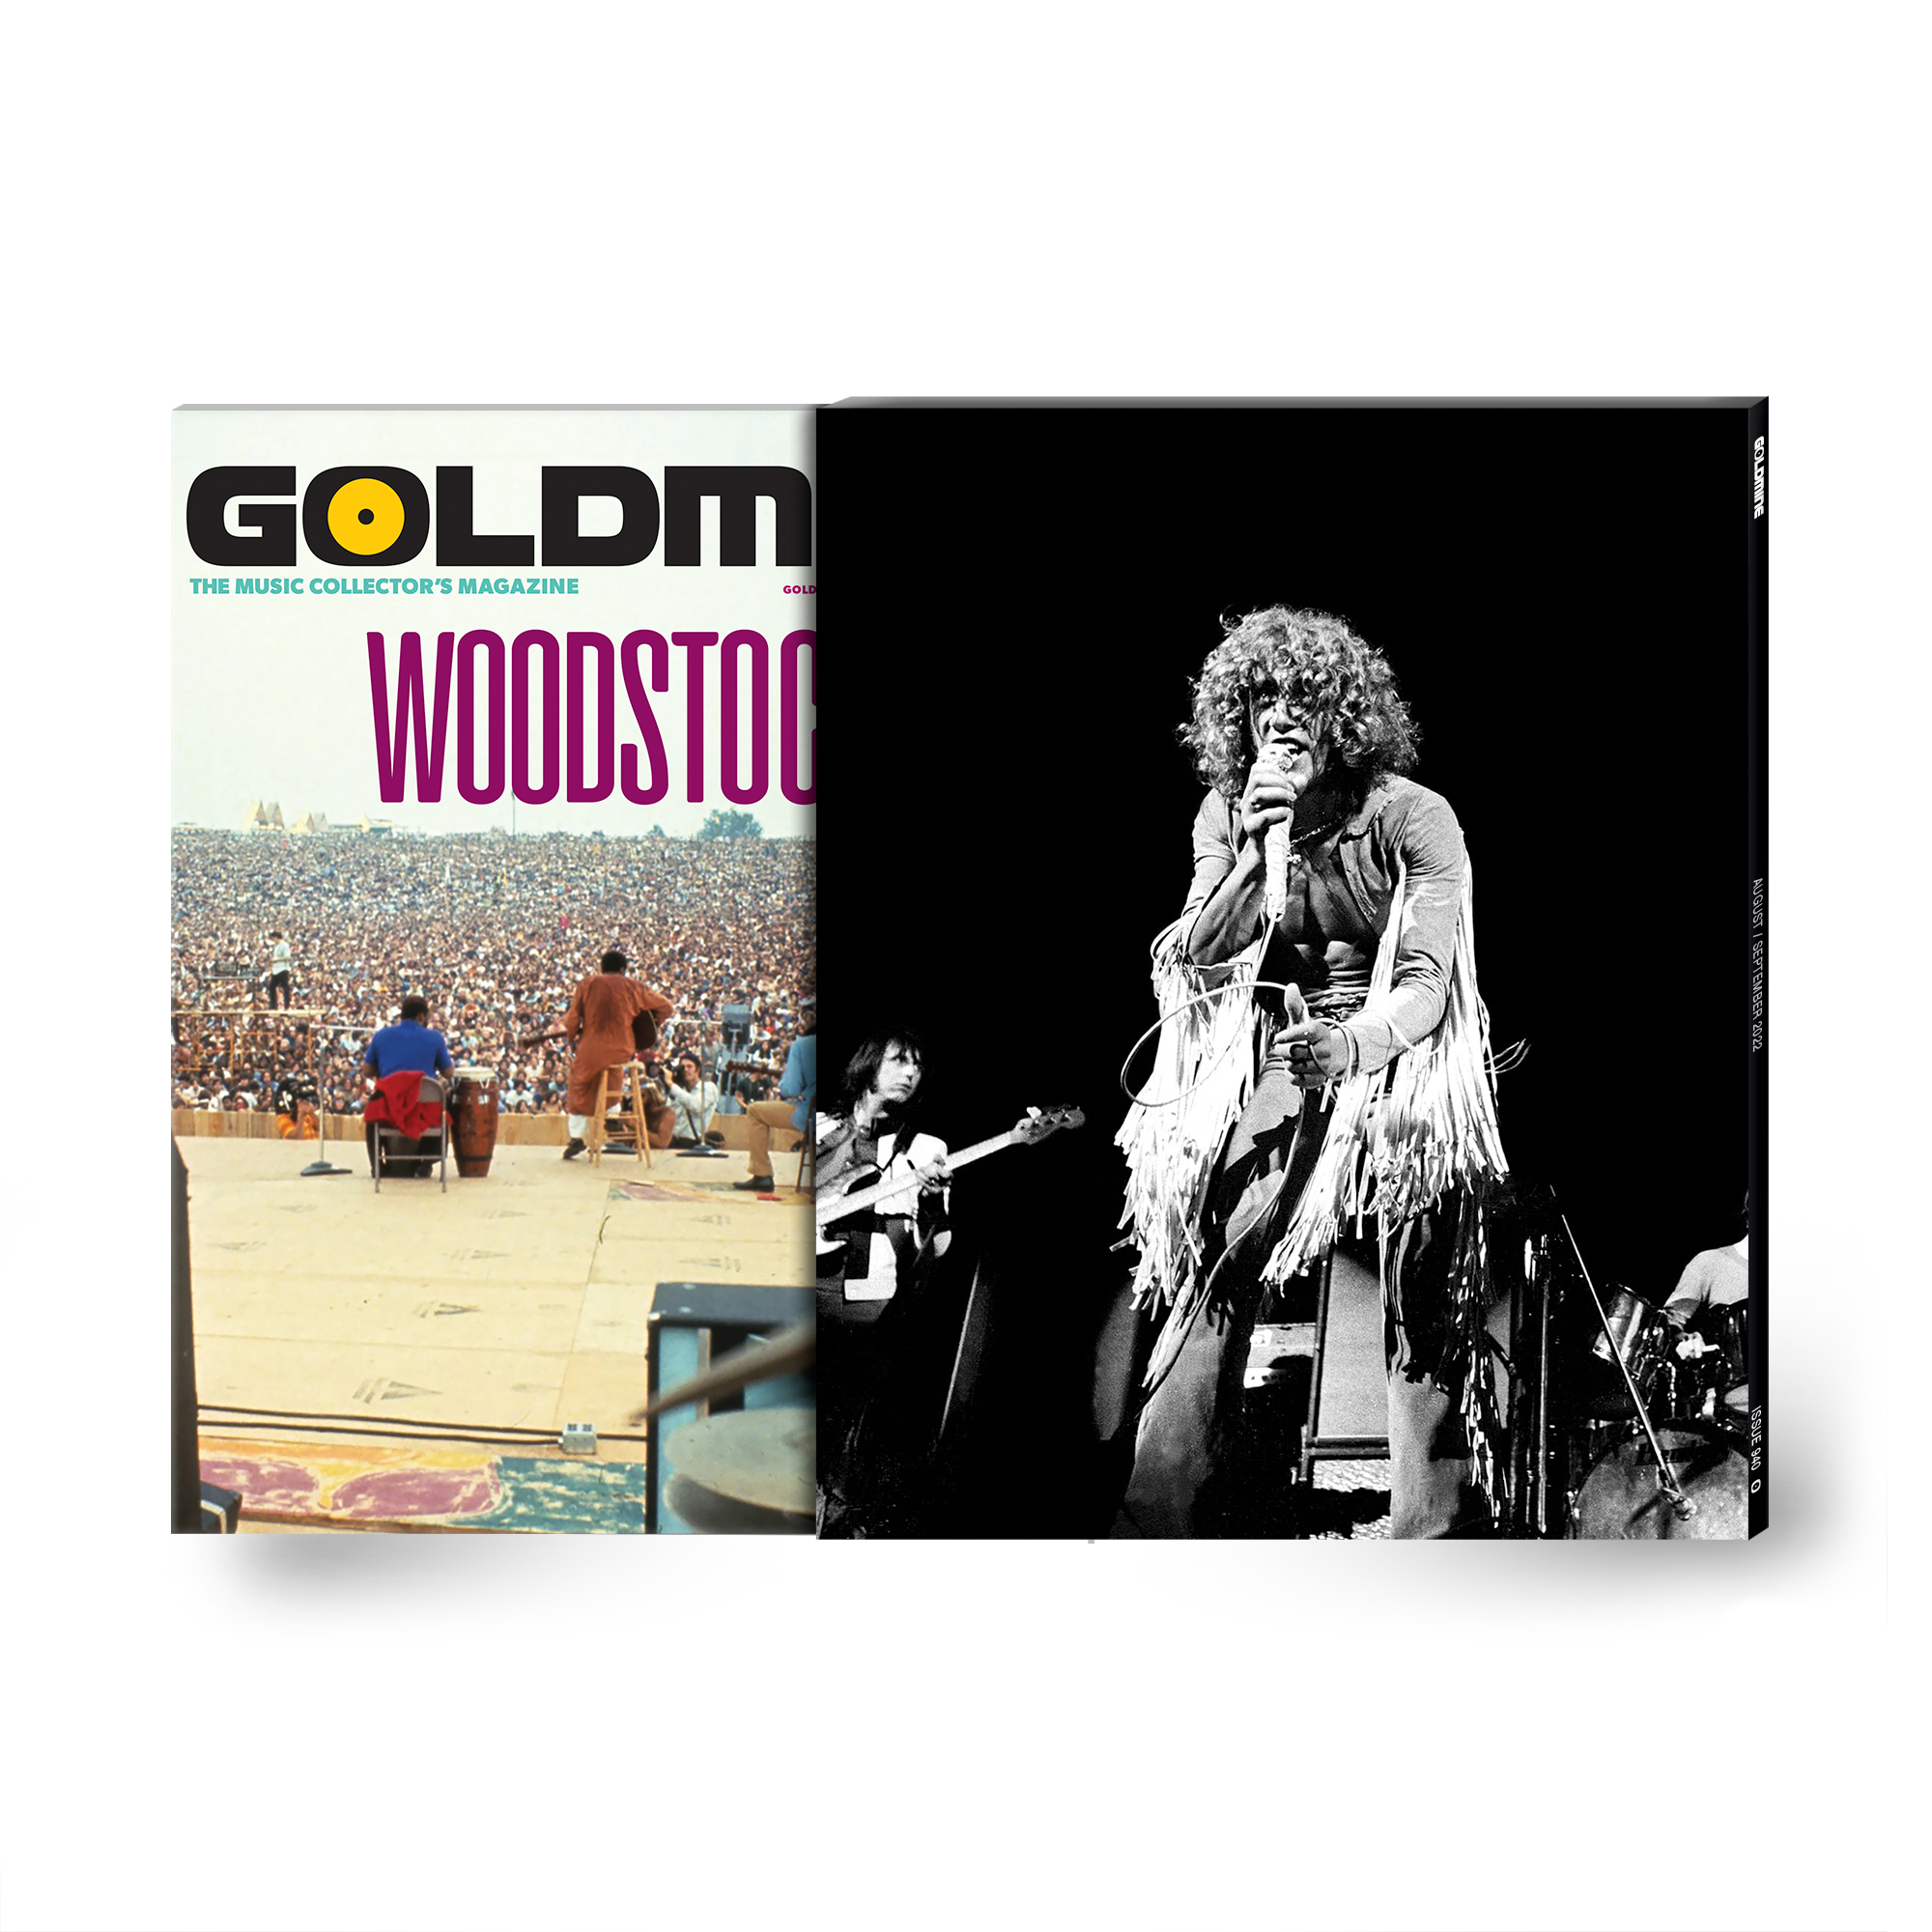 GOLDMINE MAGAZINE: AUG/SEPT 2022 ISSUE ALT COVER FEATURING WOODSTOCK ALT COVER HAND-NUMBERED SLIPCASE & PHOTO PRINTS BY HENRY DILTZ